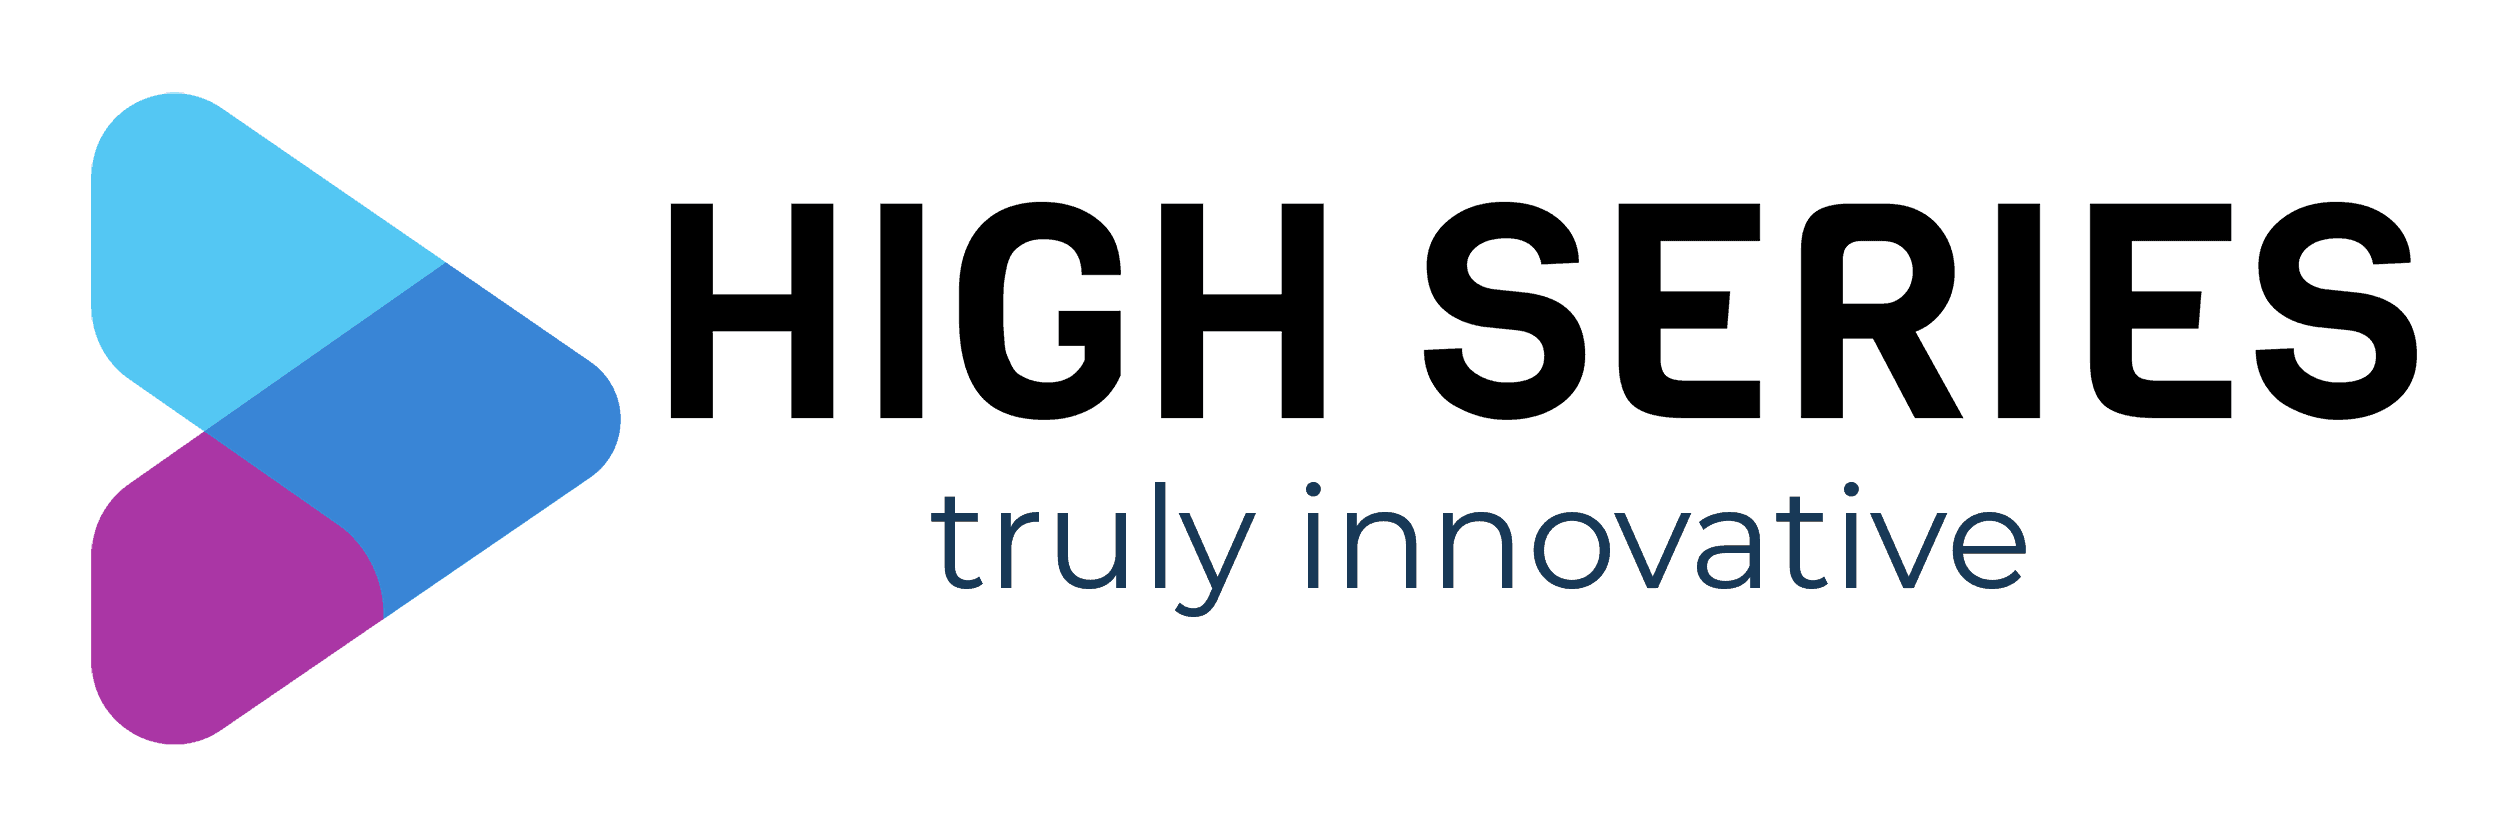 High Series Store - Outstanding E-Commerce Website offering latest Customized Clothing, Merchandize, Unique Wall Arts, and Digital Prints.